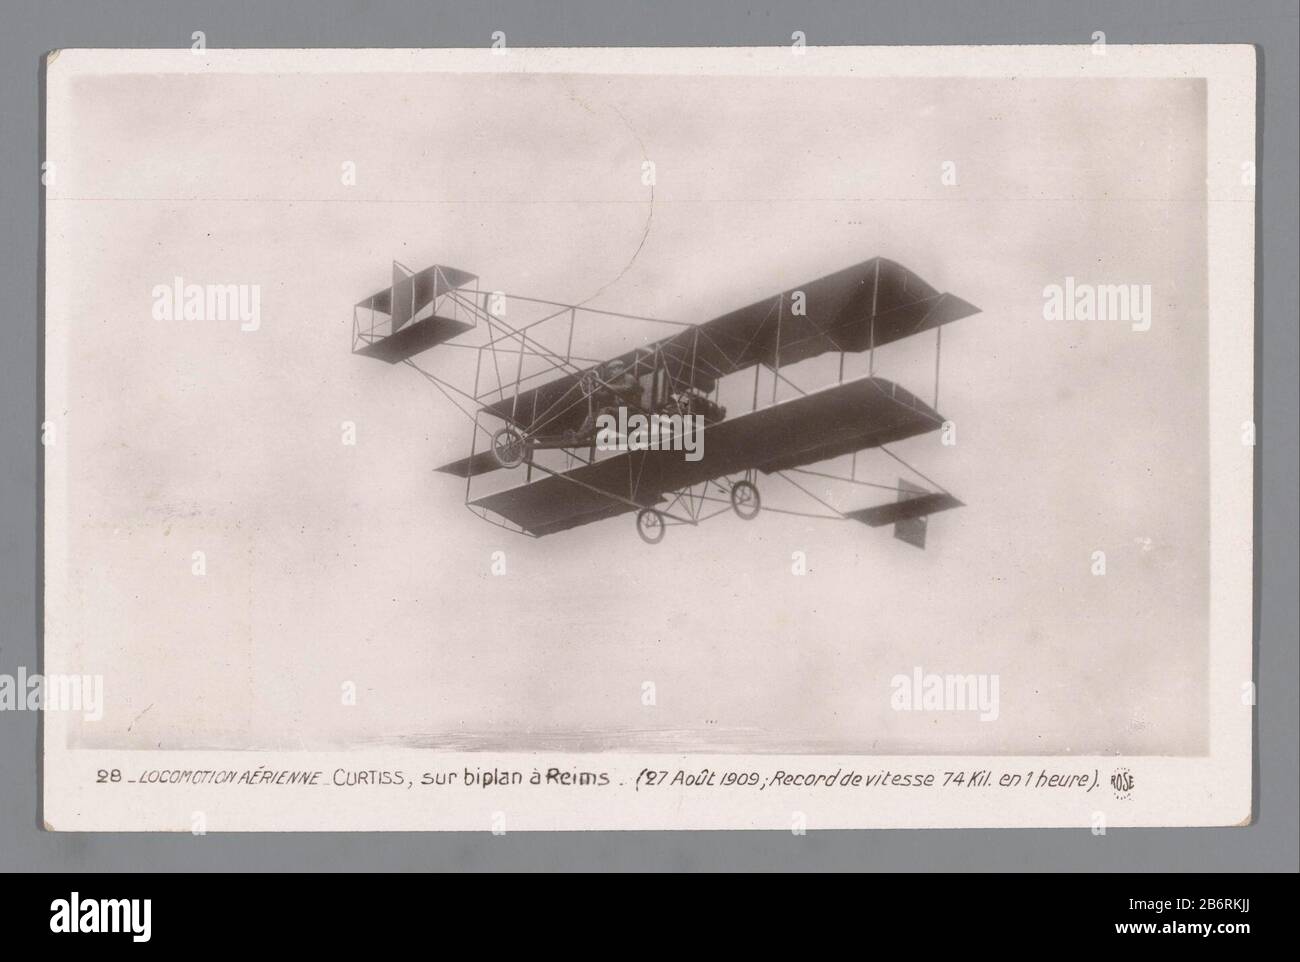 Glenn Curtiss in his plane to Reims Locomotion aérienne Curtiss, sur biplan à Reims (27 août 1909 Record de vitesse 74 Kil and 1 heure.) (Title object) Property Type: photo postcard Item number: RP-F -F21266 Inscriptions / Brands: number, verso, handwritten: 'No 28'opschrift, verso, handwritten: '28 march 1910 (...) Delft (Hollande) Manufacture Creator: photographer: Fr. Rose (listed property) Place manufacture: Reims Date: Aug 27 1909 Material: paper Technique: gelatin silver print dimensions: photo: h 78 mm × W 132 mm Subject: aircraft, aeroplaneWie: Glen Curtiss Stock Photo